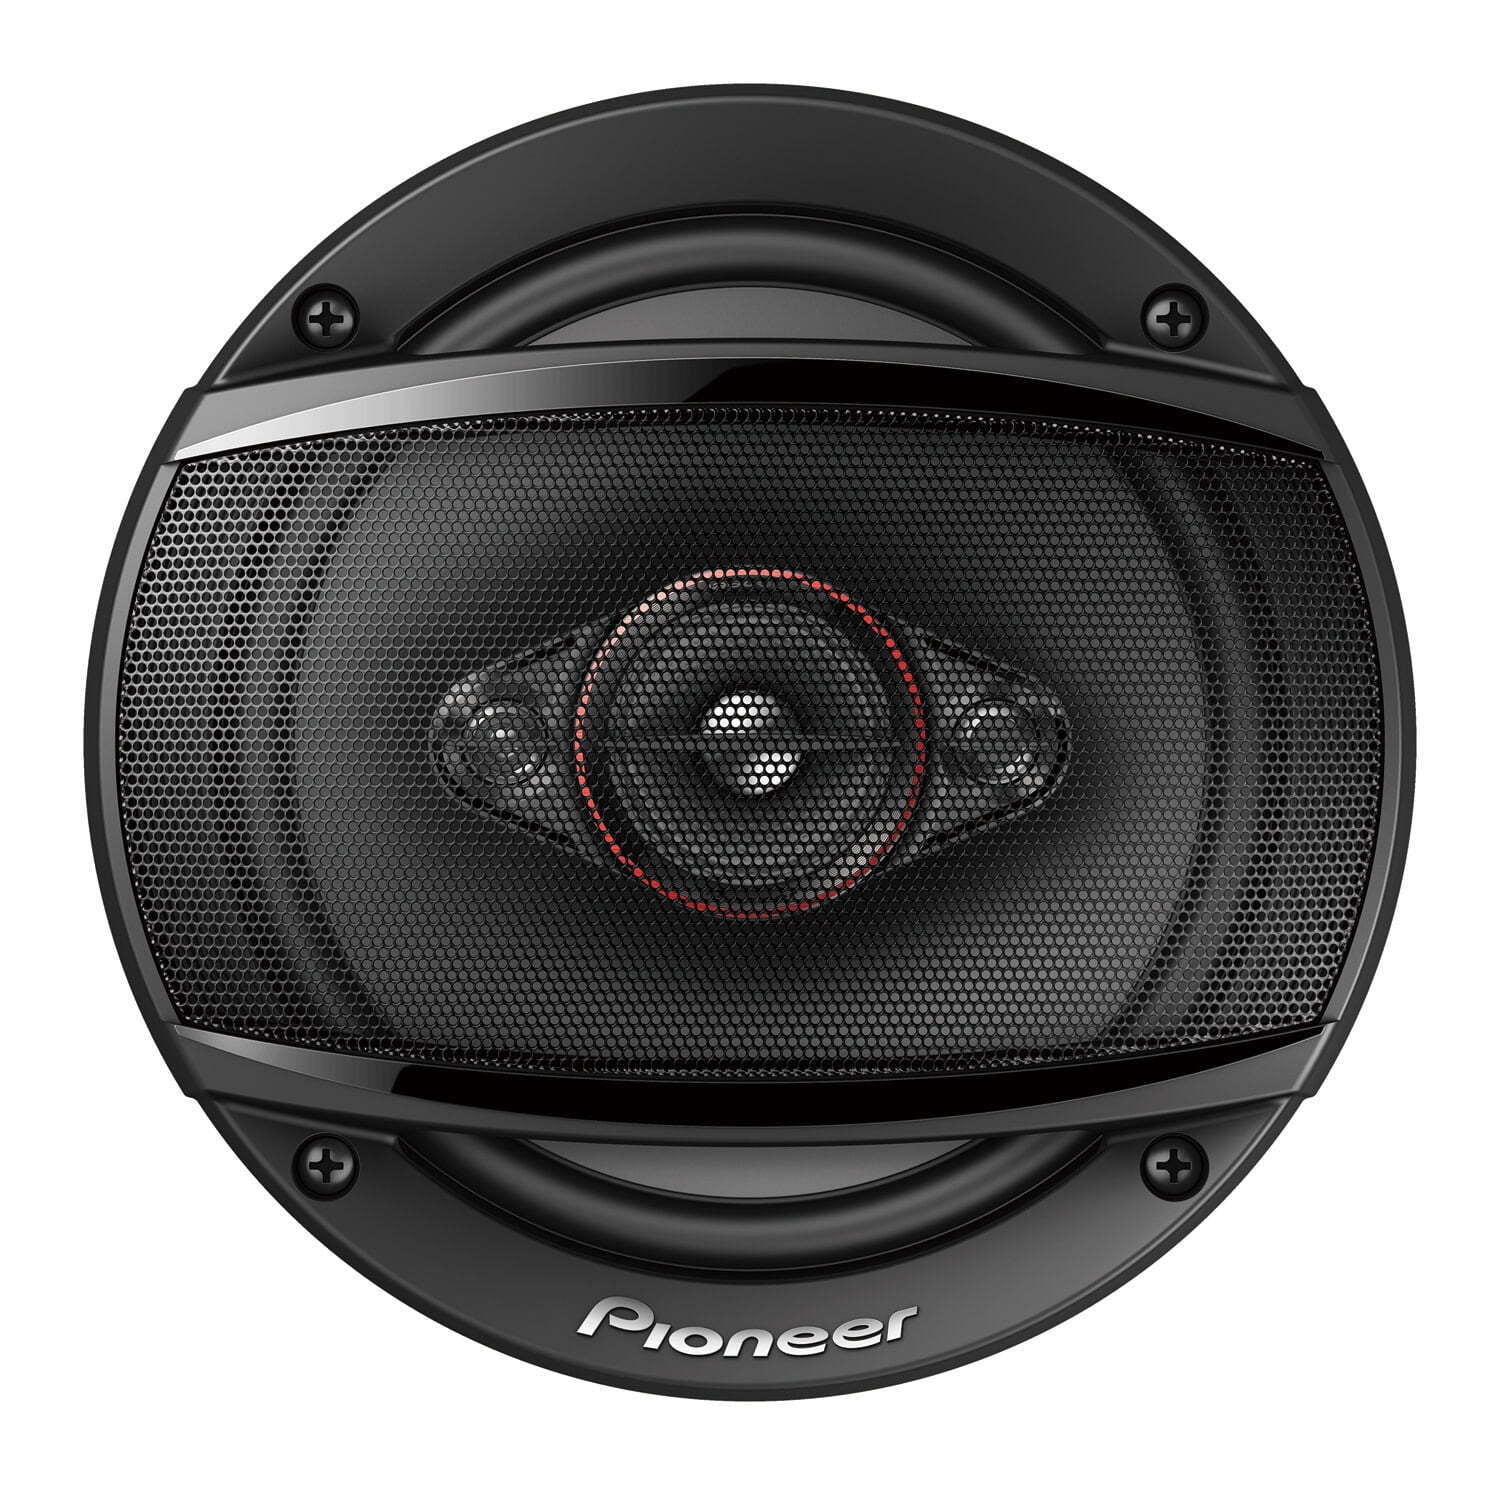 TS-600M, 6-1/2" 4-way Coaxial Speakers, 320W Max Power | 11mm Tweeter Tweeter and 1-5/8" Cone Midrange | Coaxial Speakers | (Sold in Pairs) - Walmart.com